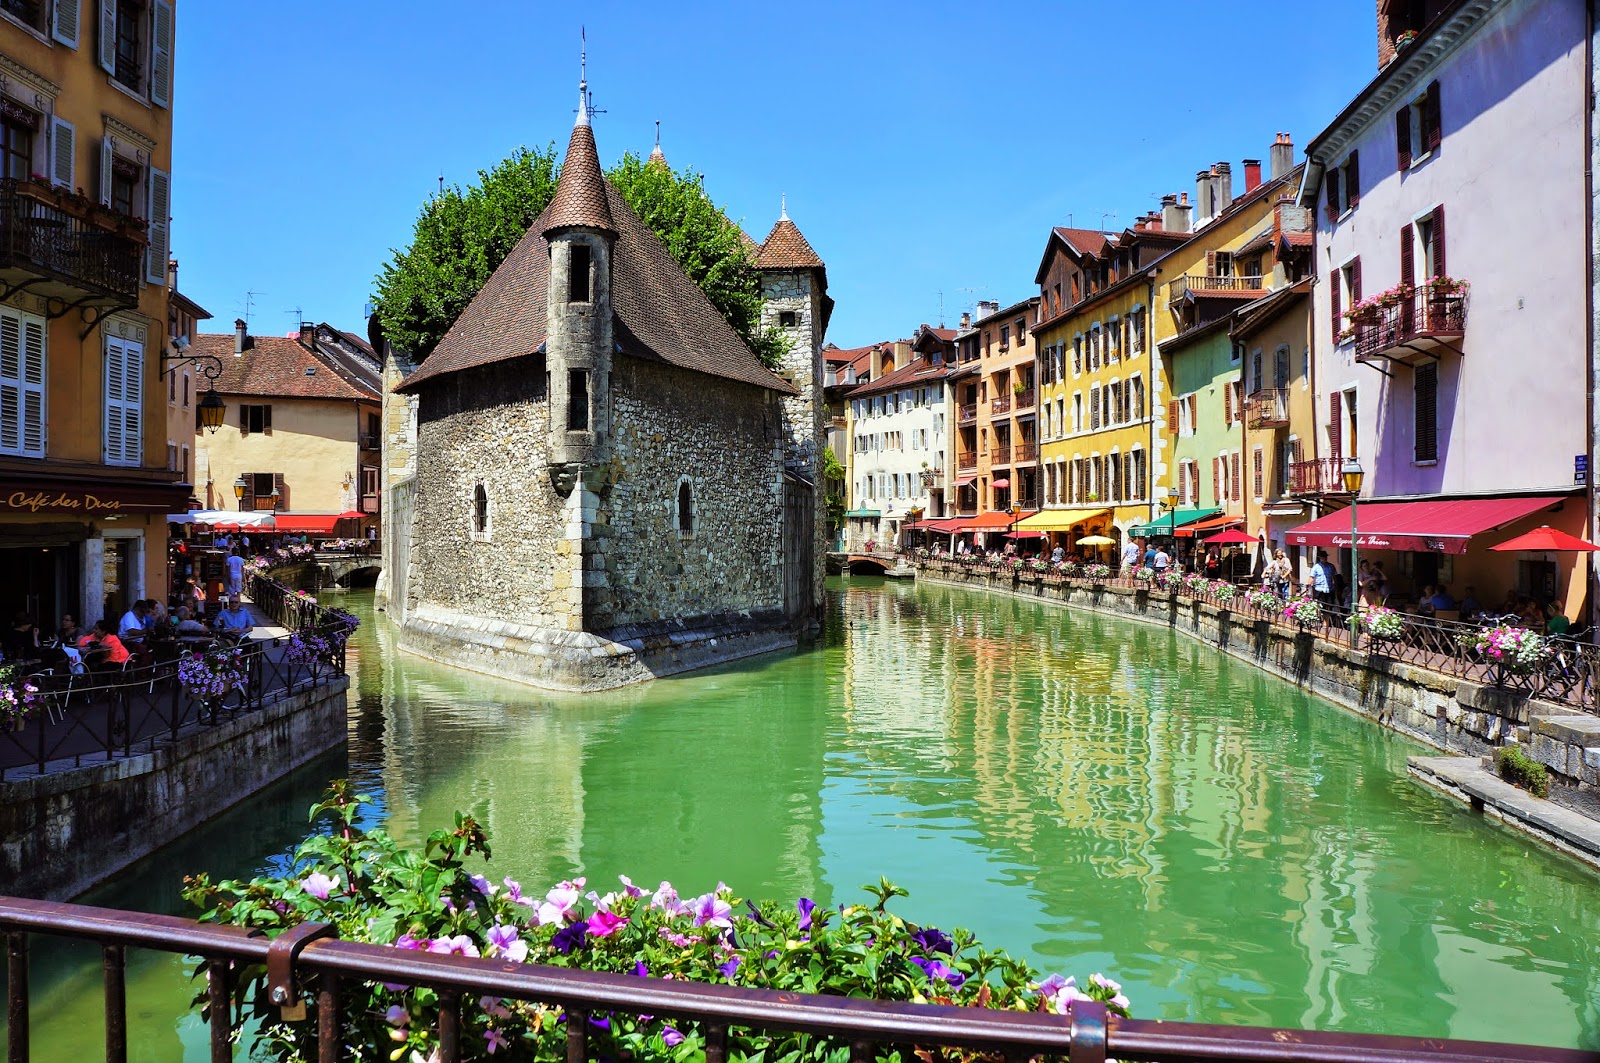 annecy - photo #16